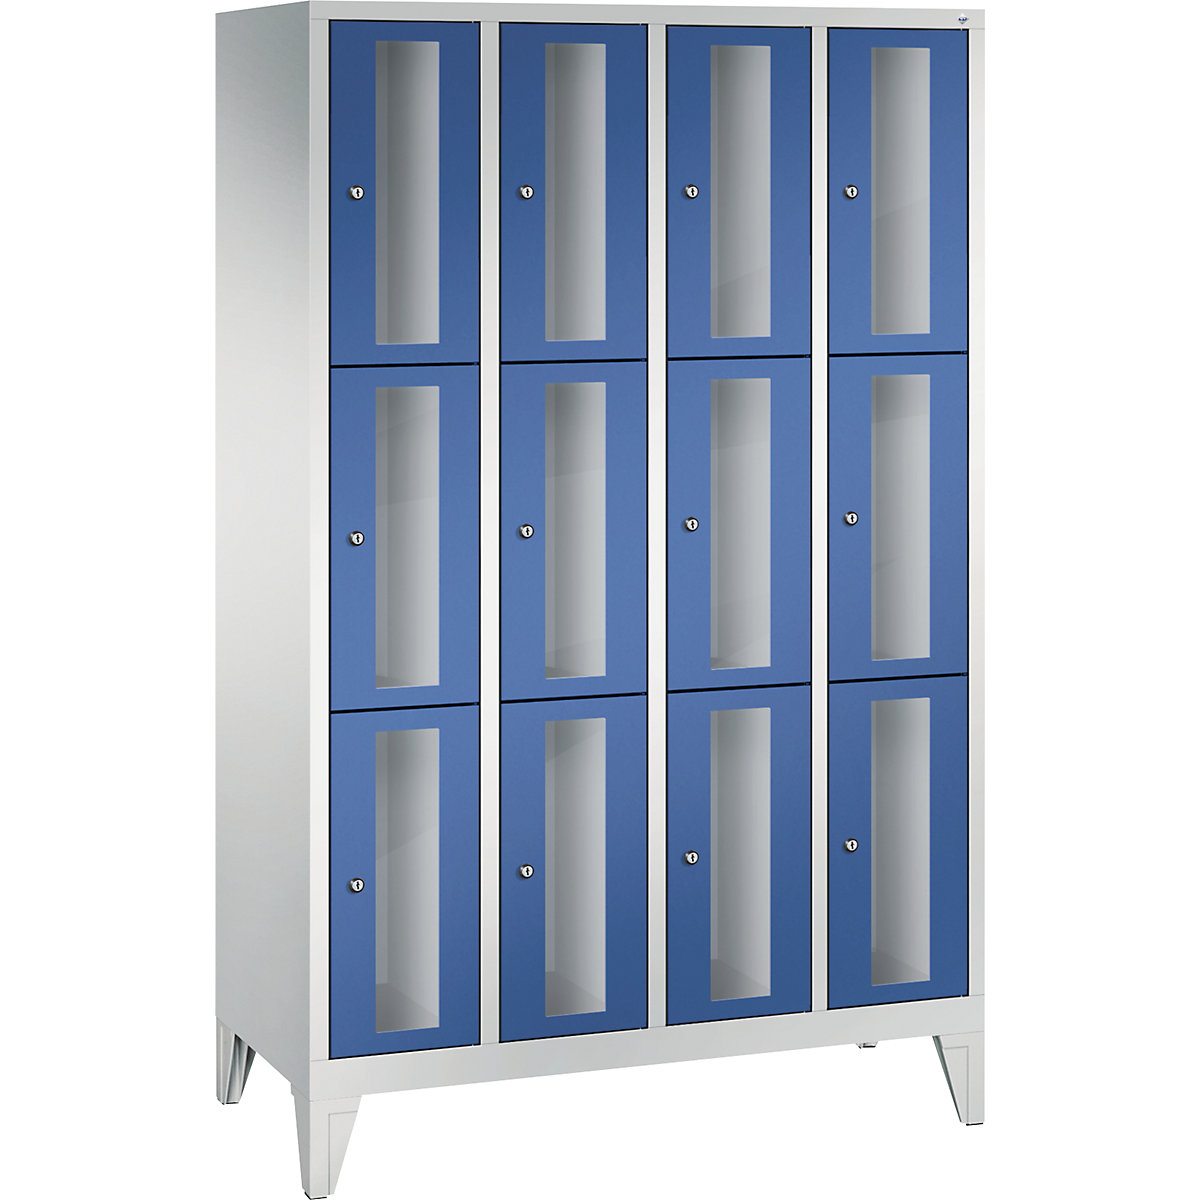 CLASSIC locker unit, compartment height 510 mm, with feet – C+P, 12 compartments, width 1190 mm, gentian blue door-4